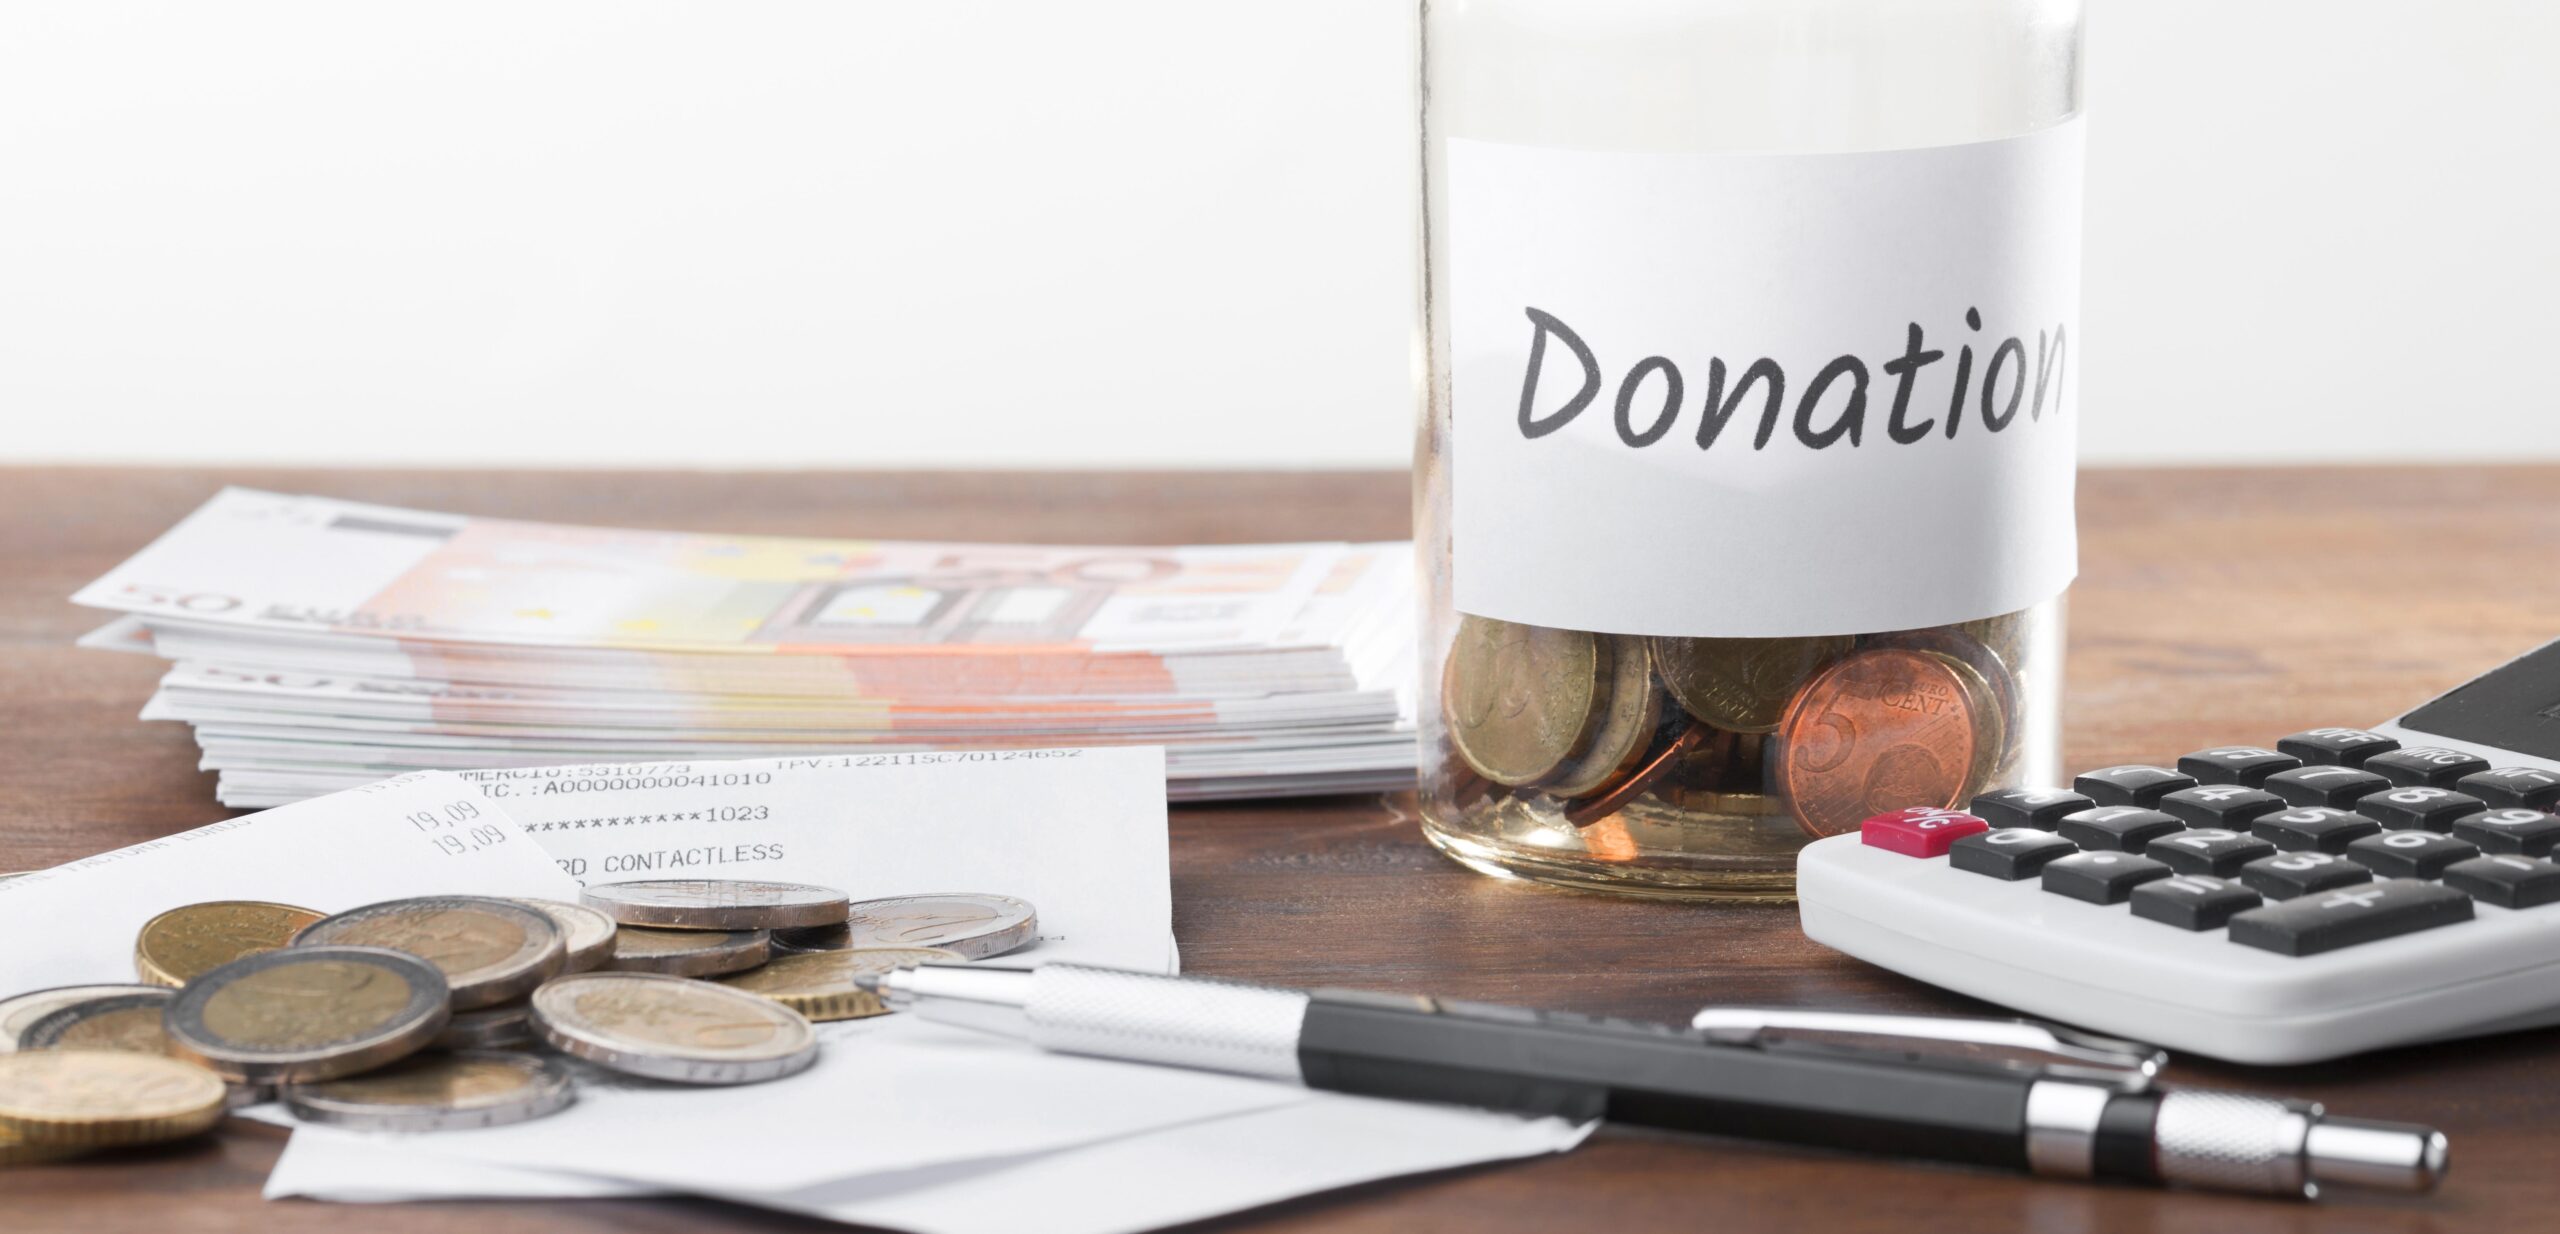 Year-End Donations and the Art of Tax-Smart Giving